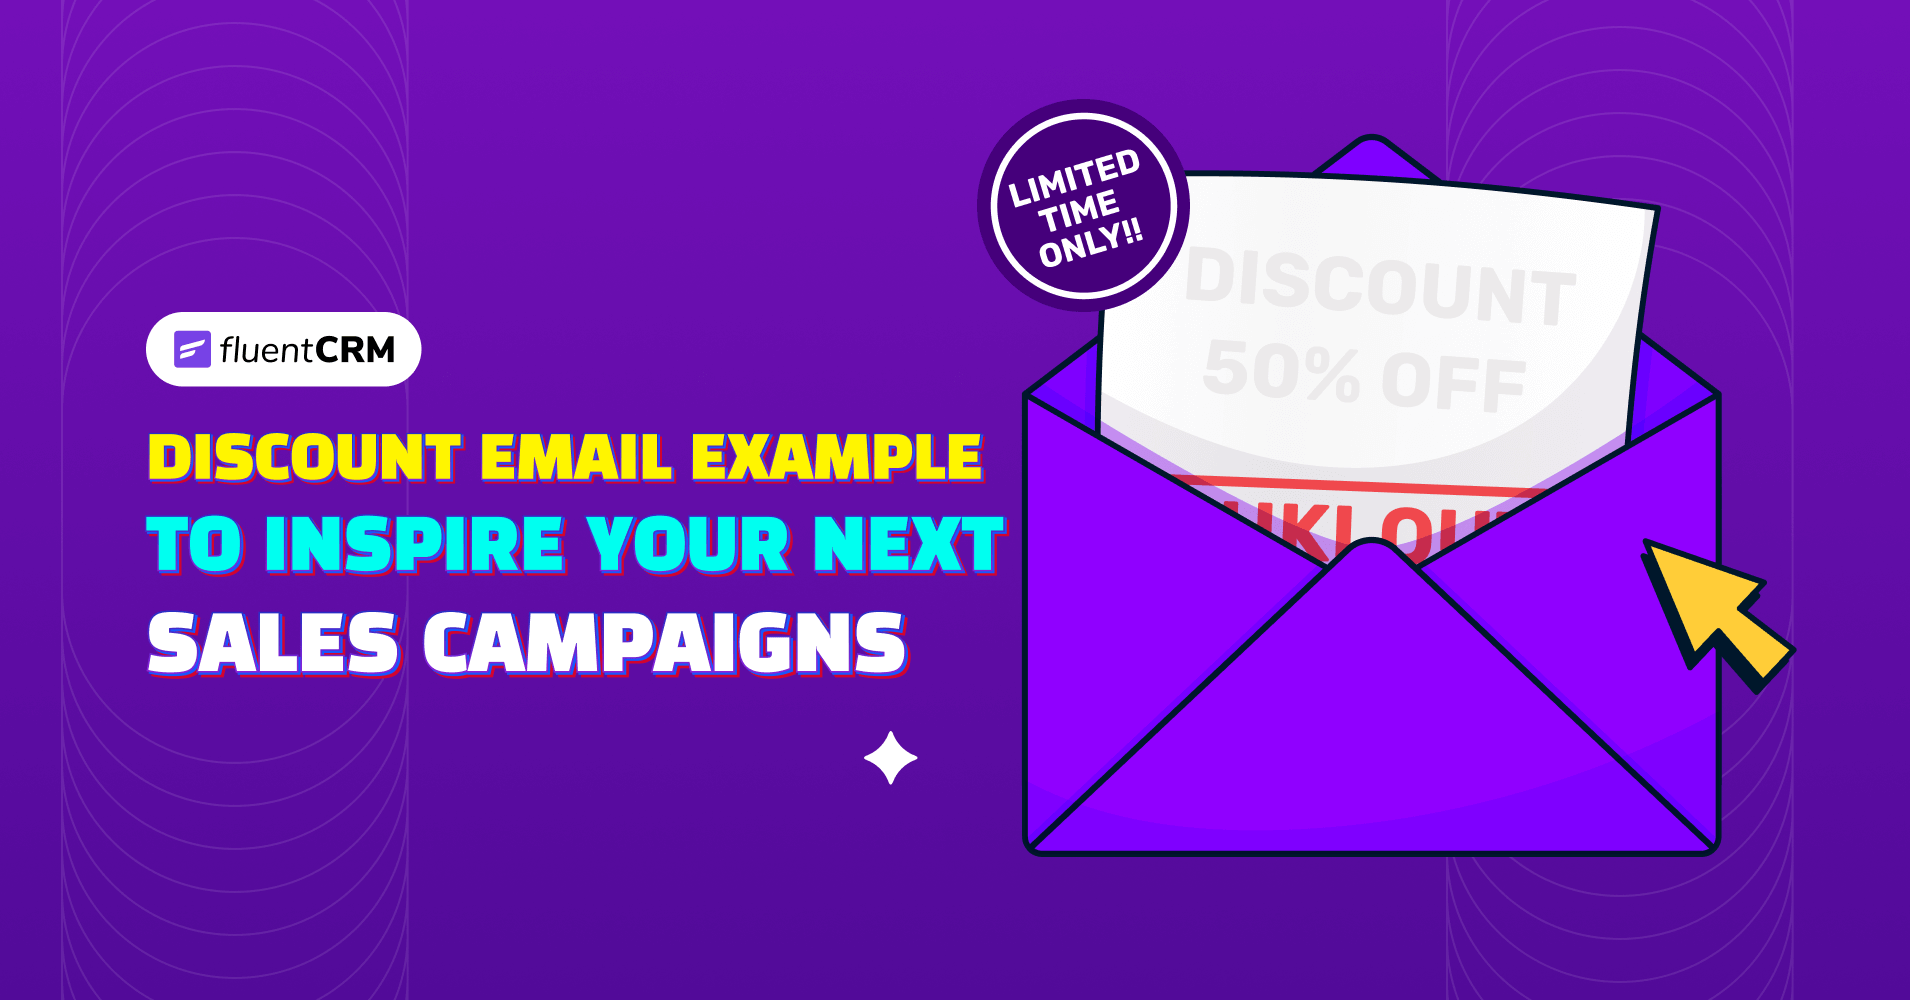 13 Professional Discount Email Examples to Inspire Your Next Sales Campaign